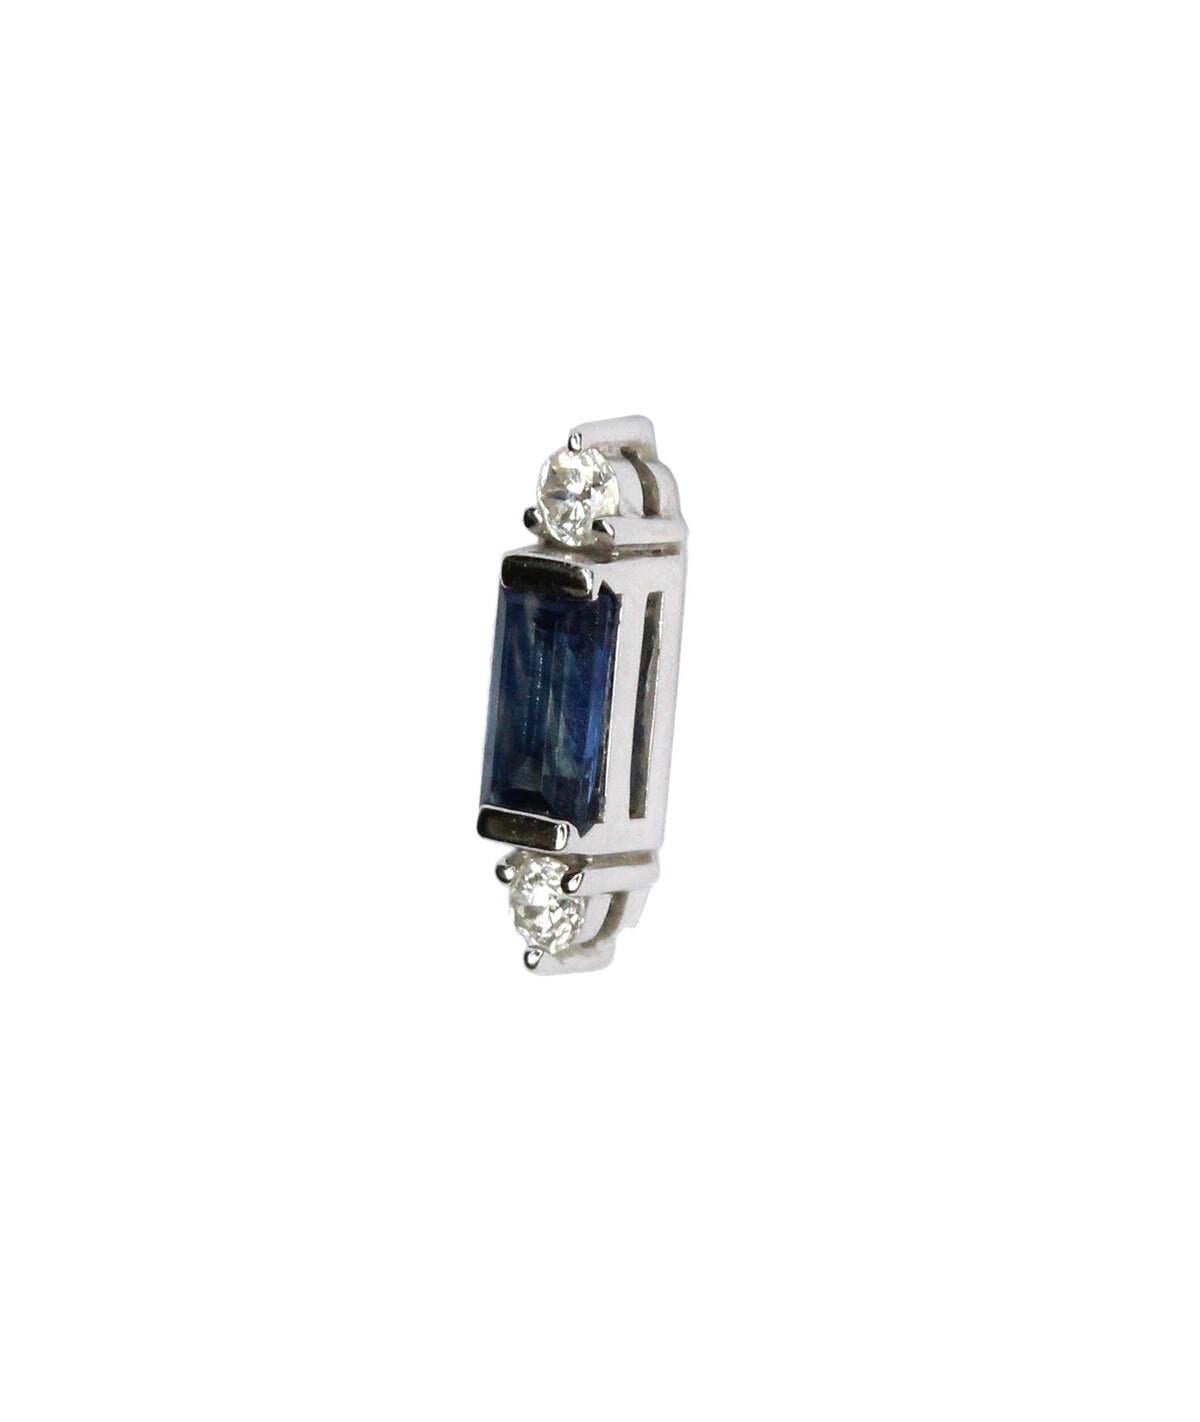 Channel the captivating spirit of the Roaring Twenties with these exquisite baguette sapphire studs, crafted from luxurious 18K gold. Each glistening stud weighs a delicate 1.83 grams, showcasing the timeless elegance of the Art Deco era.

At their